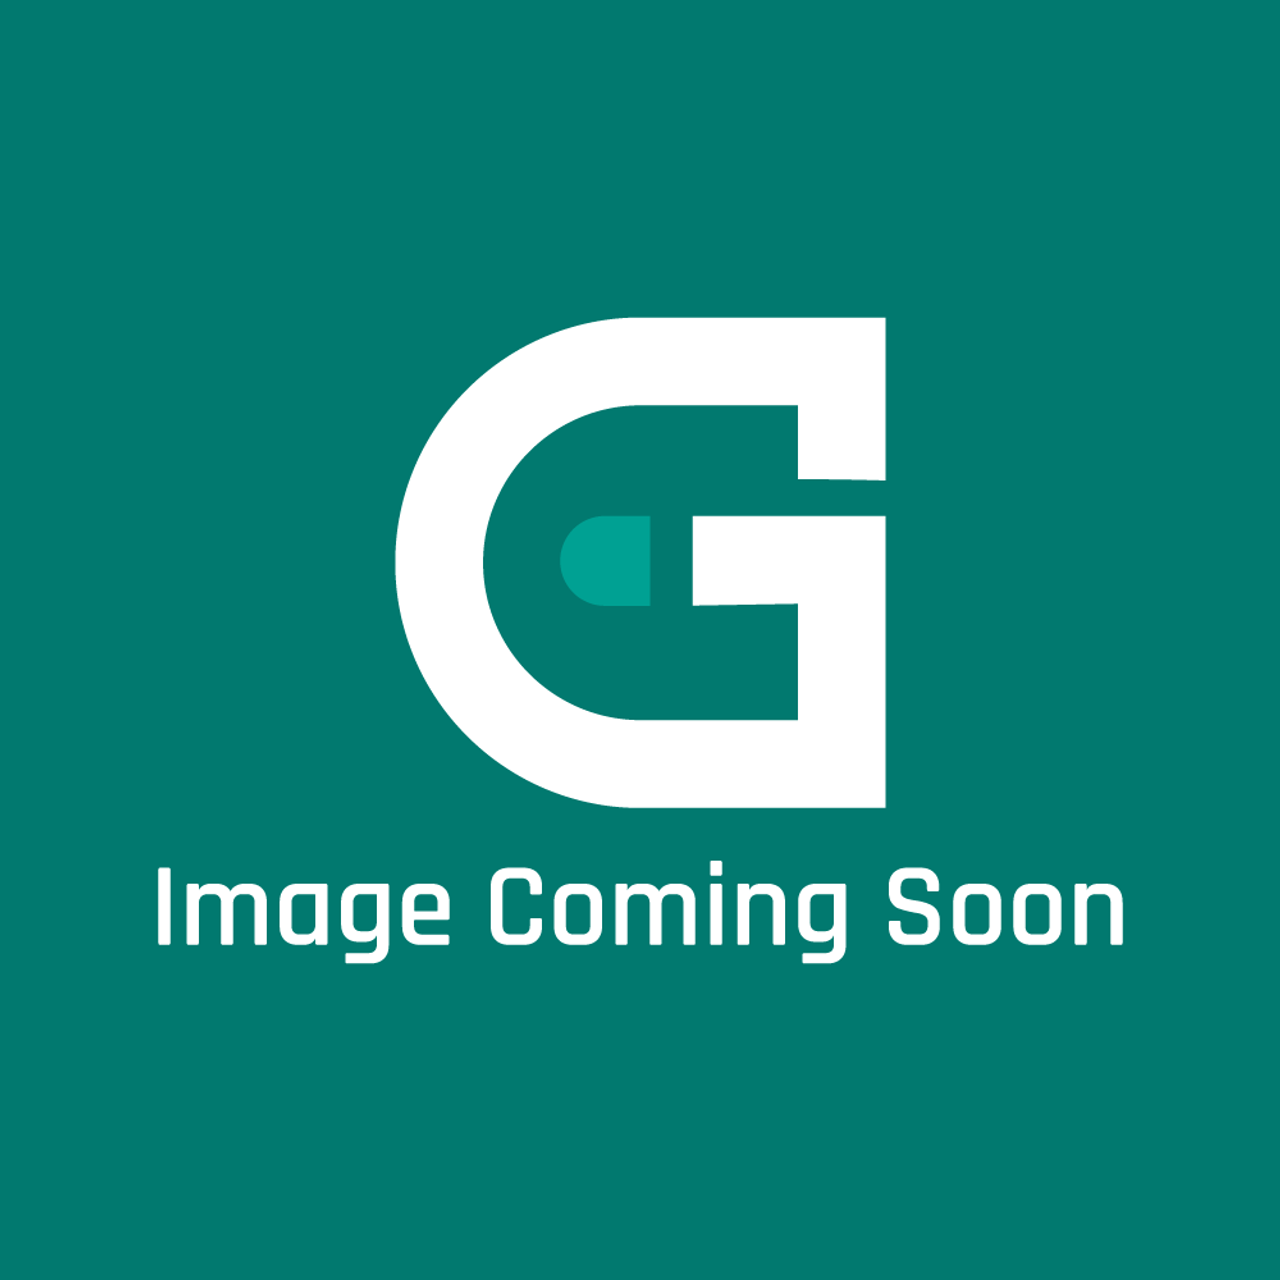 LG 4994A20127G - Case,Control - Image Coming Soon!